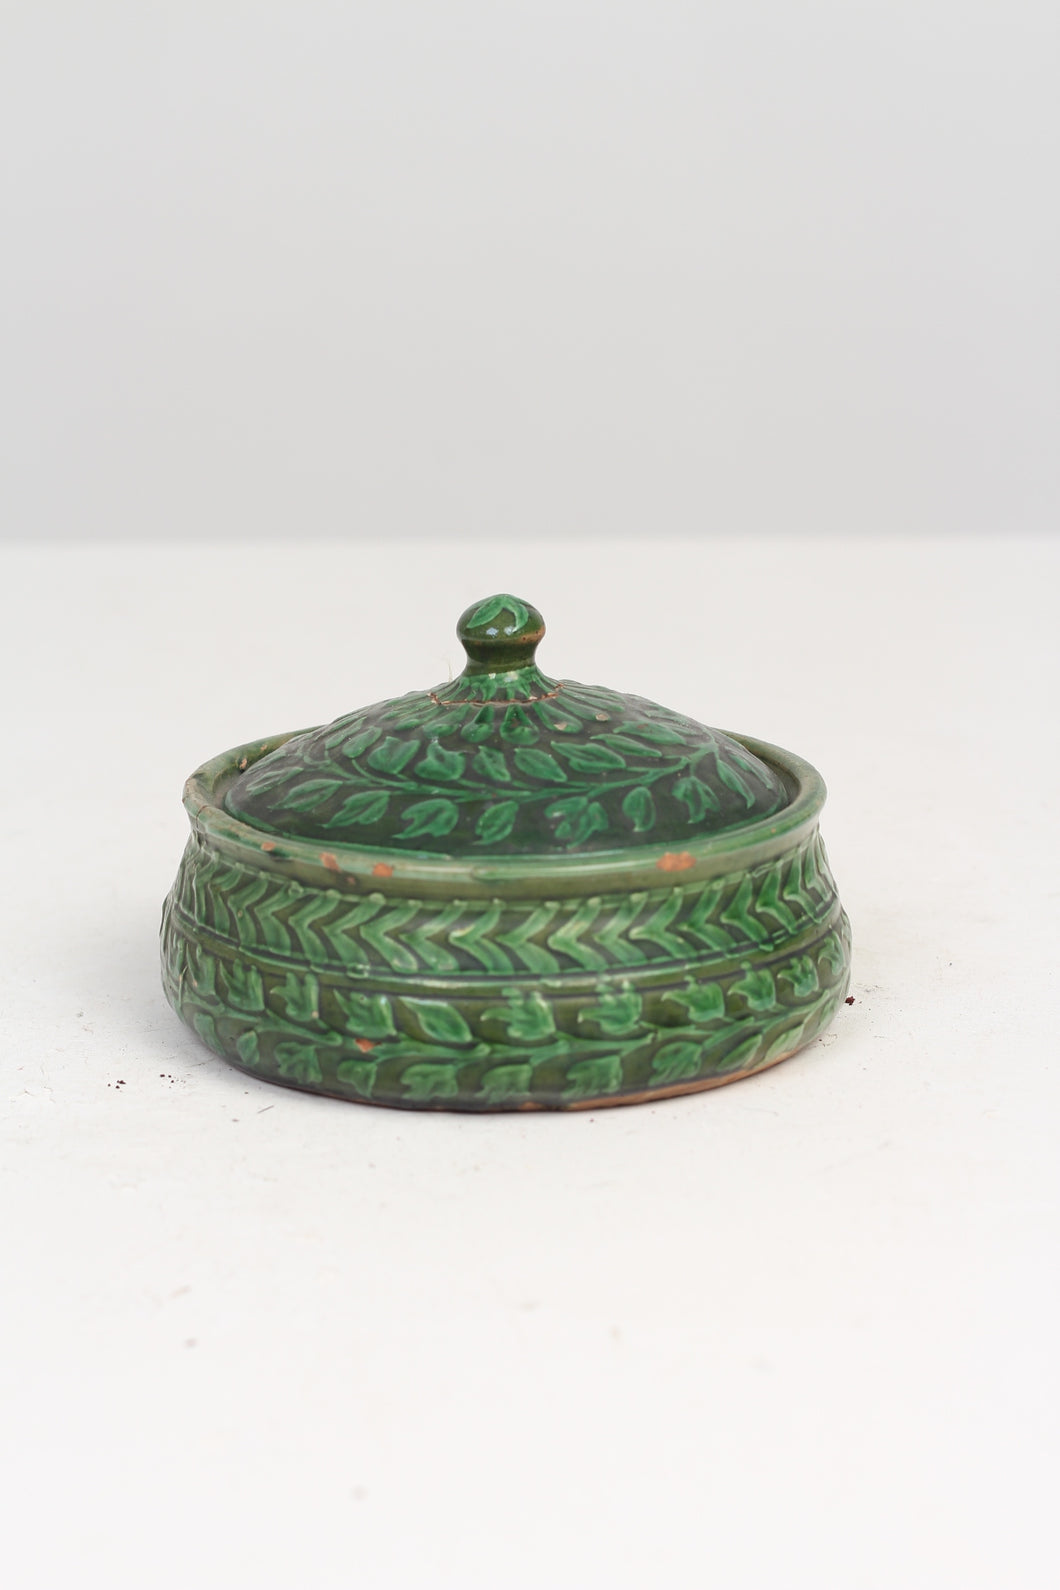 Green Artisan Hand Painted Glazed Ceramic Pot with Lid 10